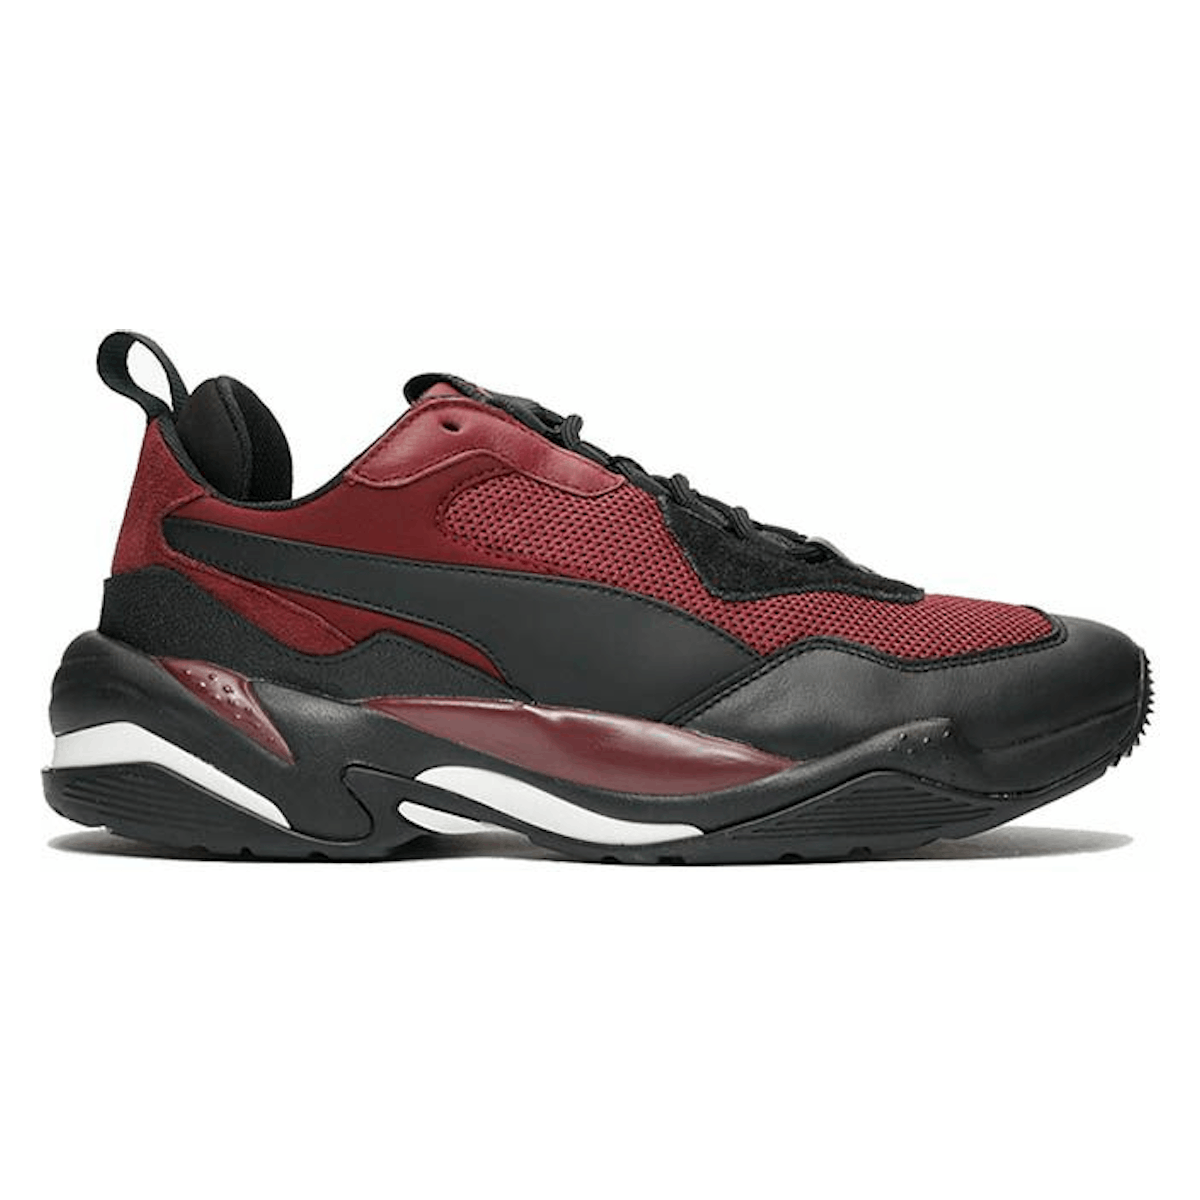 Puma Thunder Spectra Rhododendron